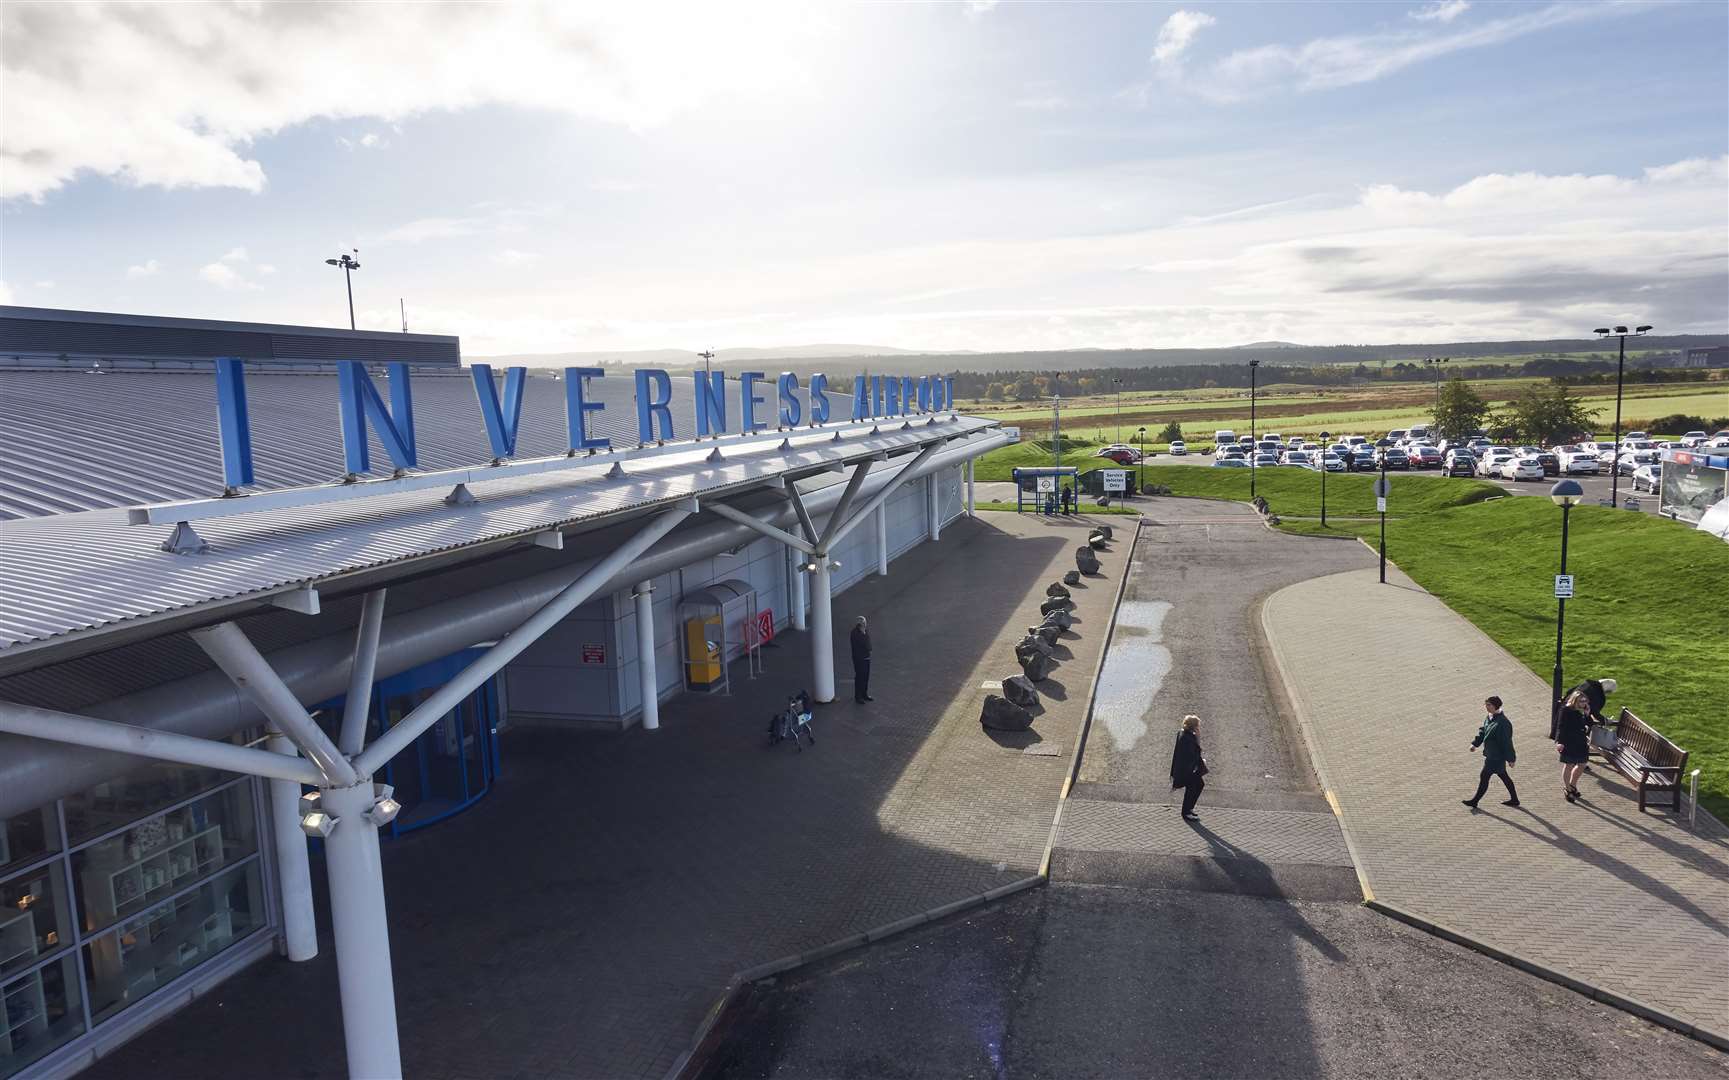 Hial, which operates Inverness Airport, plans to centralise air traffic control services.